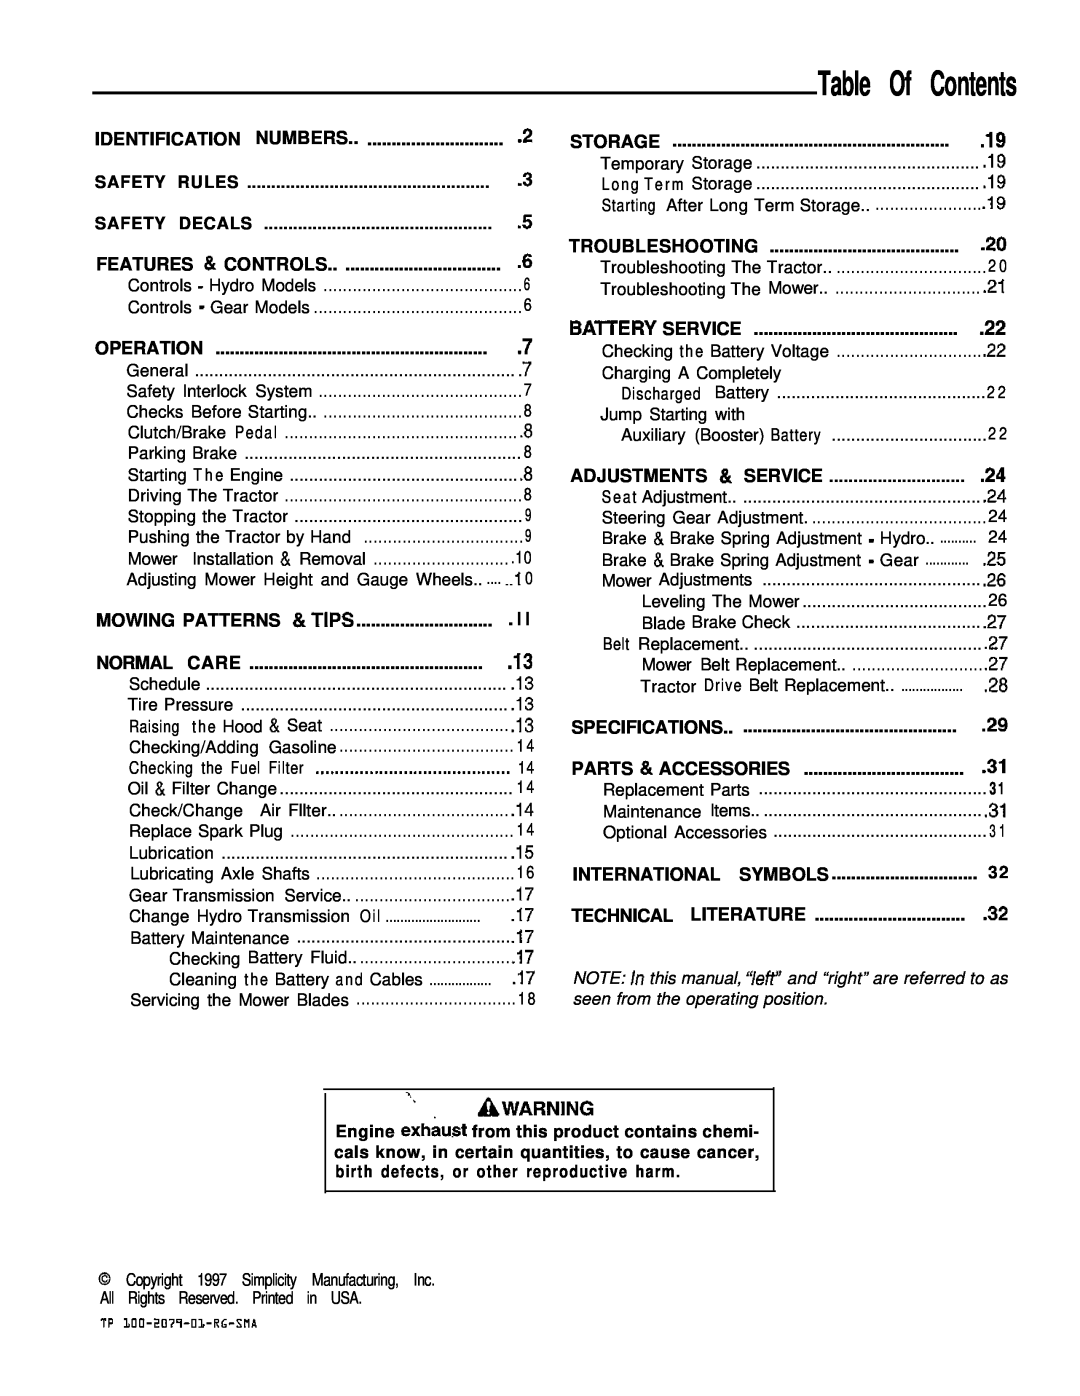 Simplicity 1693264, 1693266 manual ‘.Awarning, Table Of Contents 